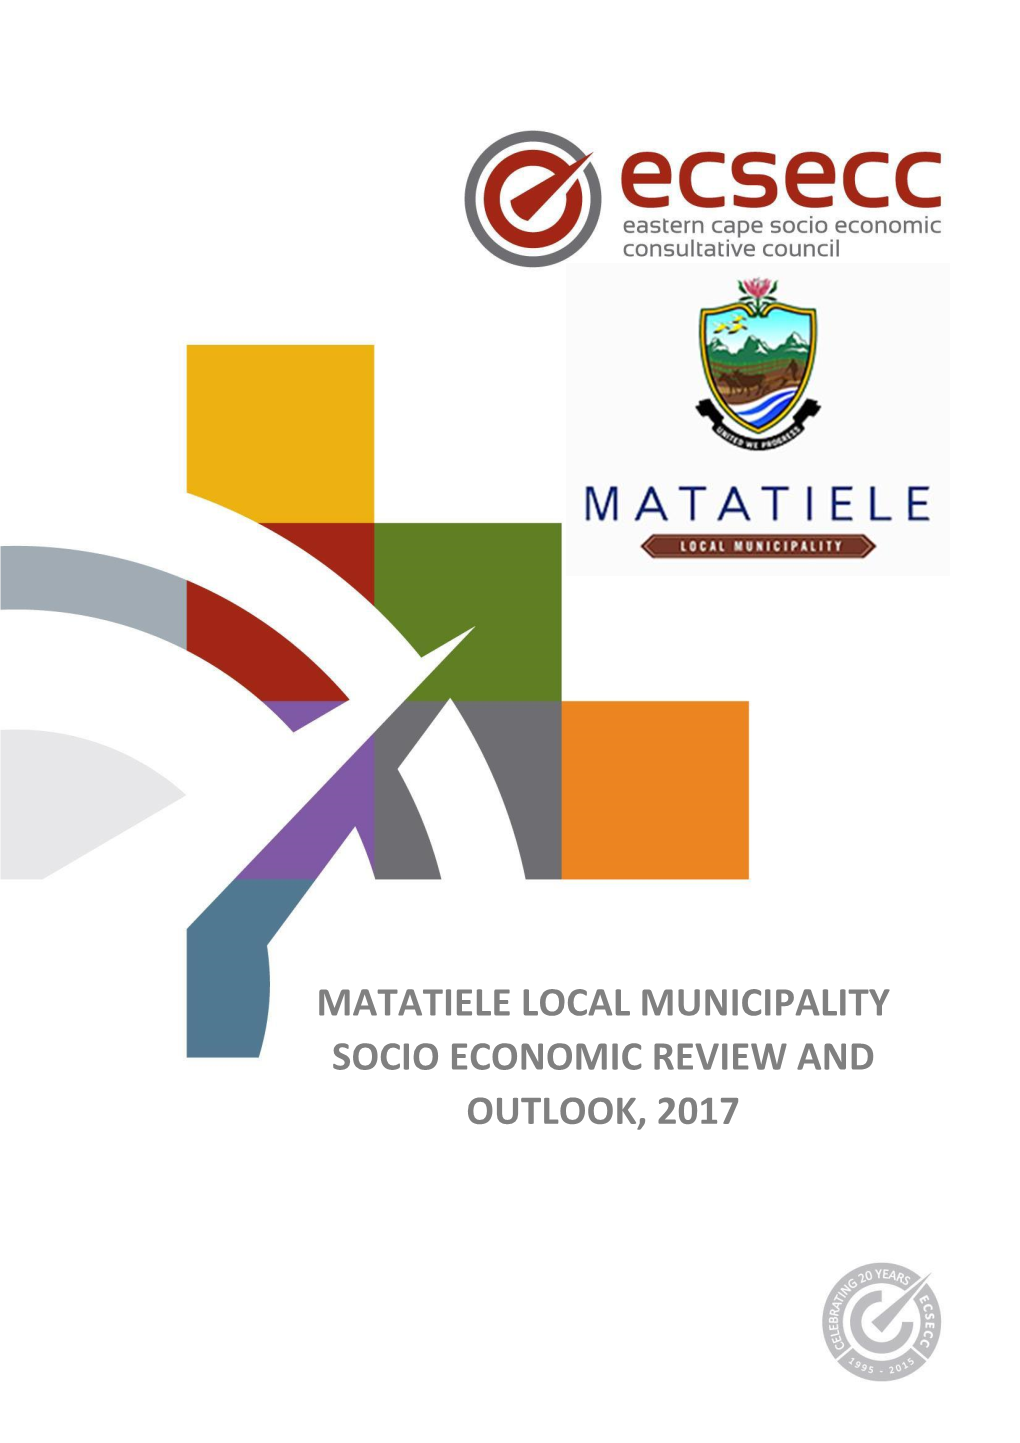 Matatiele Local Municipality Socio Economic Review and Outlook, 2017